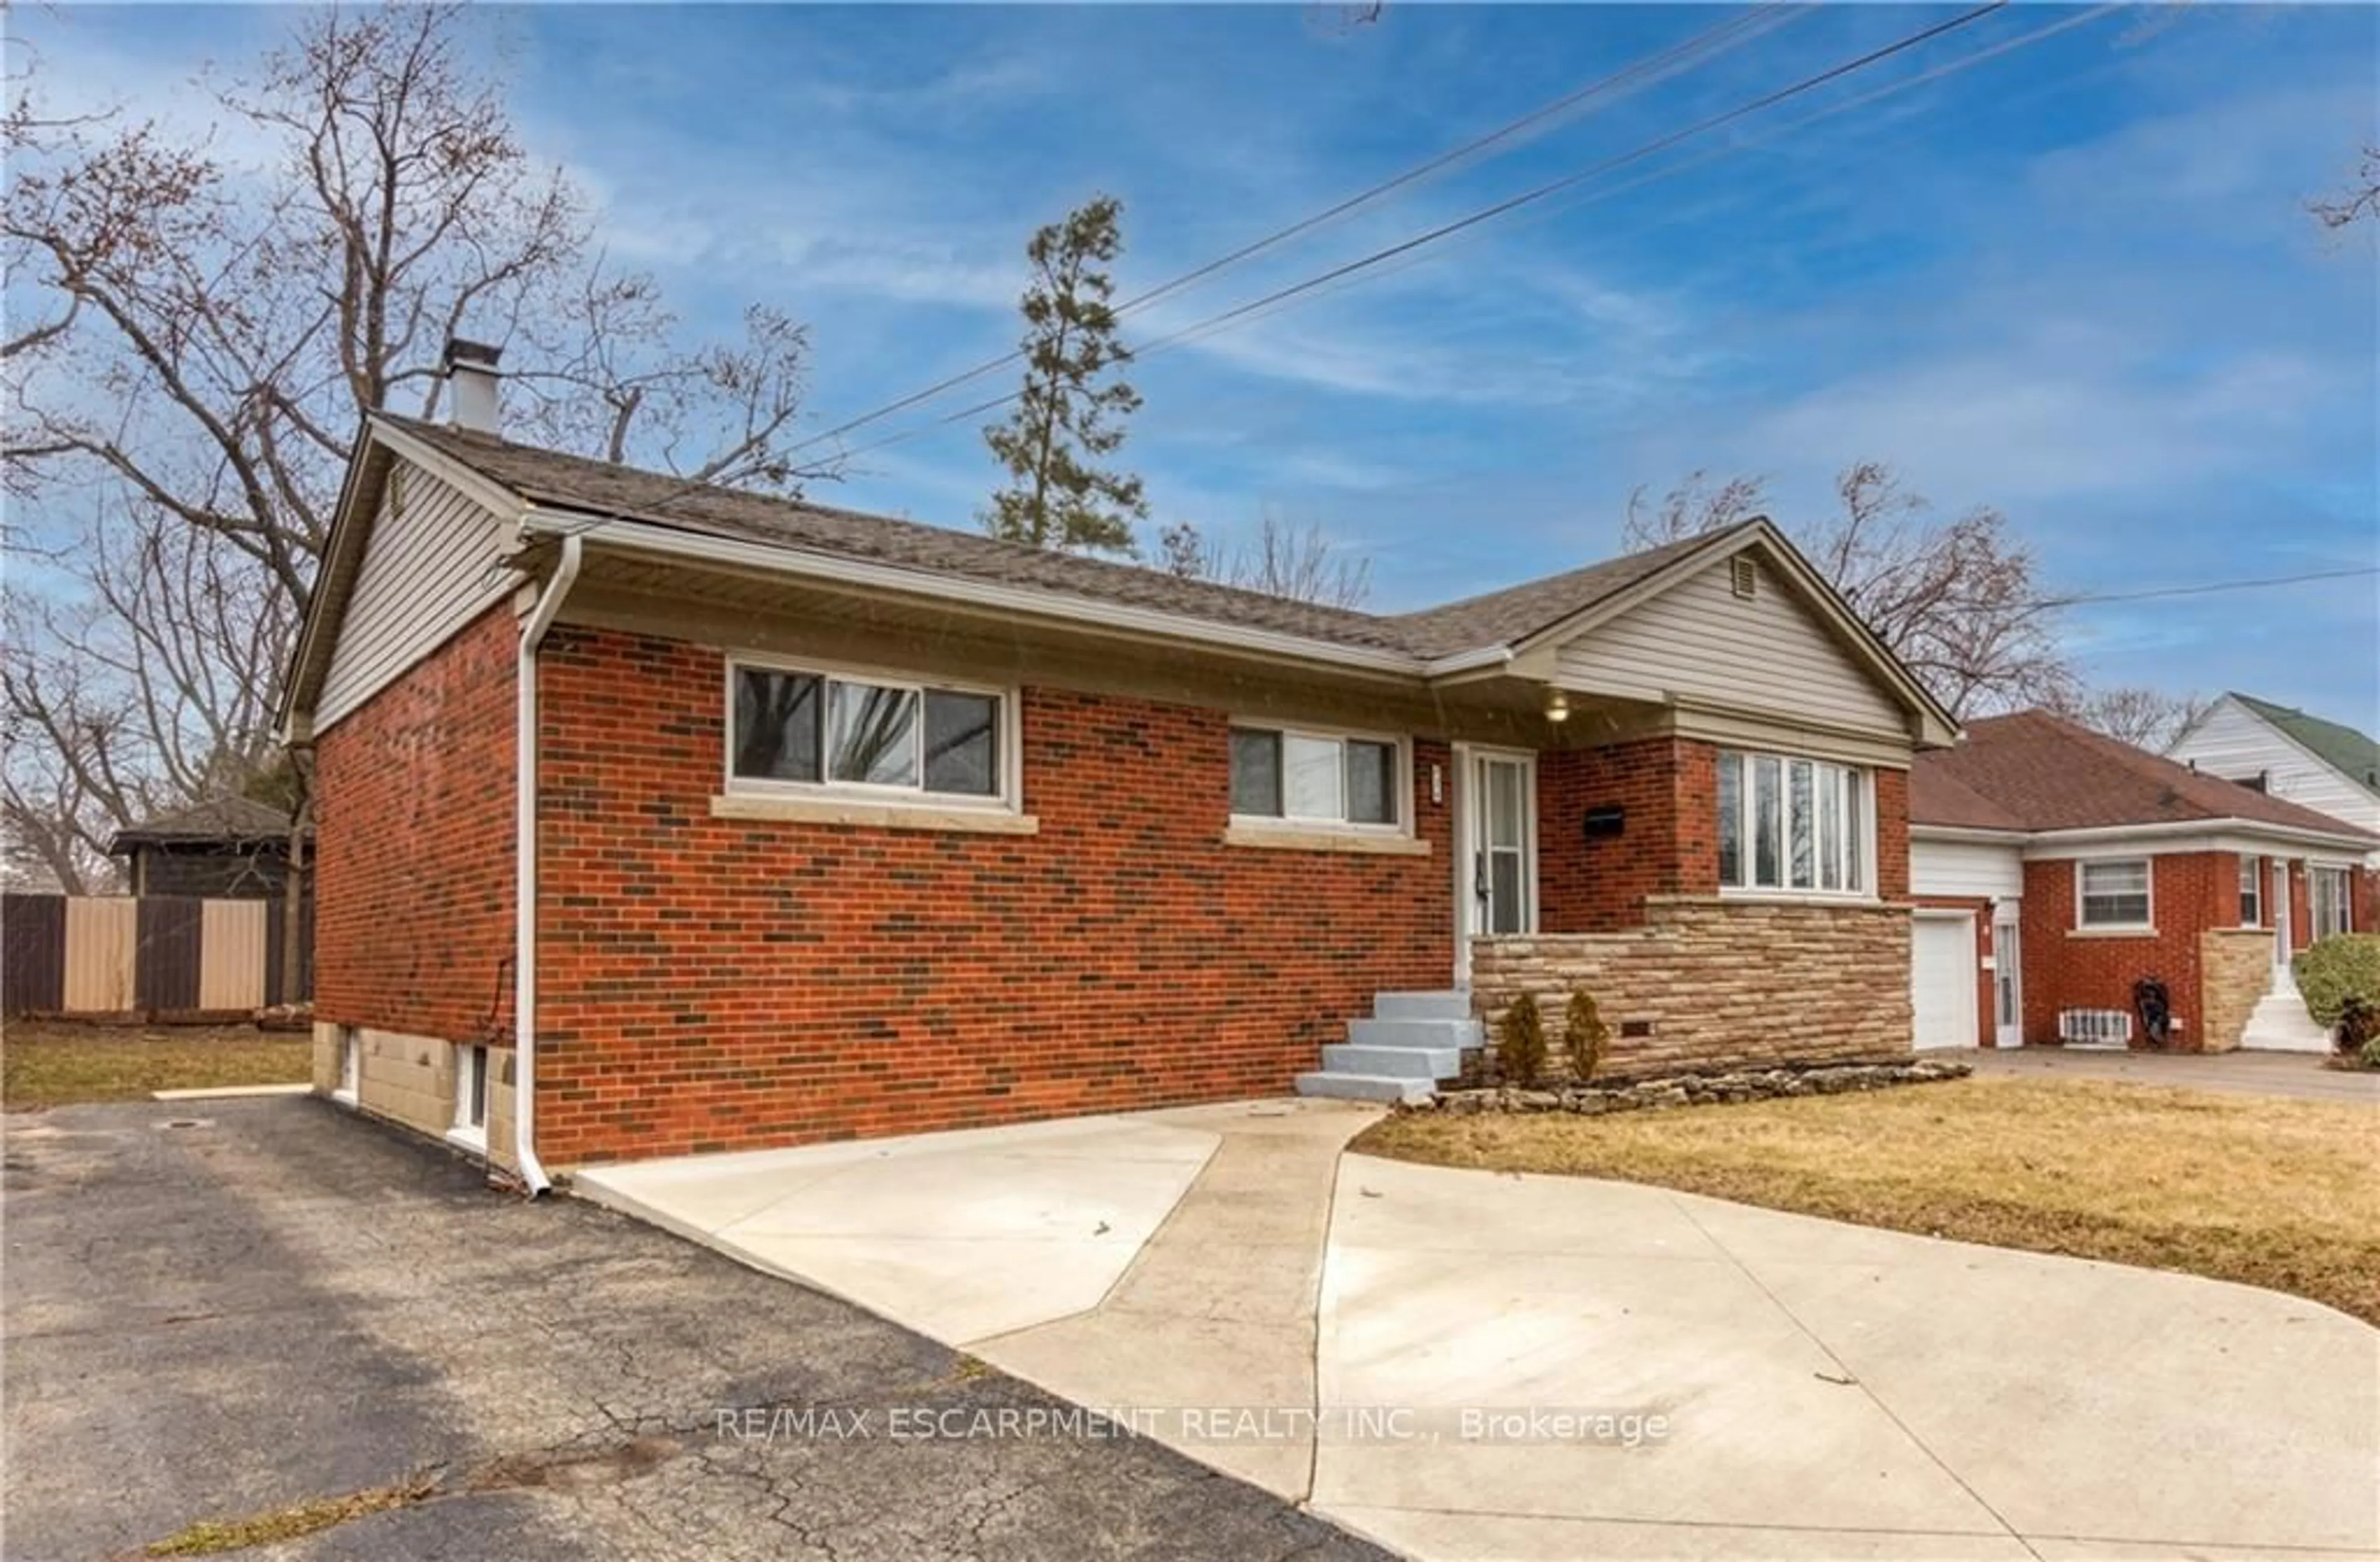 Home with brick exterior material for 39 Bland Ave, Hamilton Ontario L8G 3R2